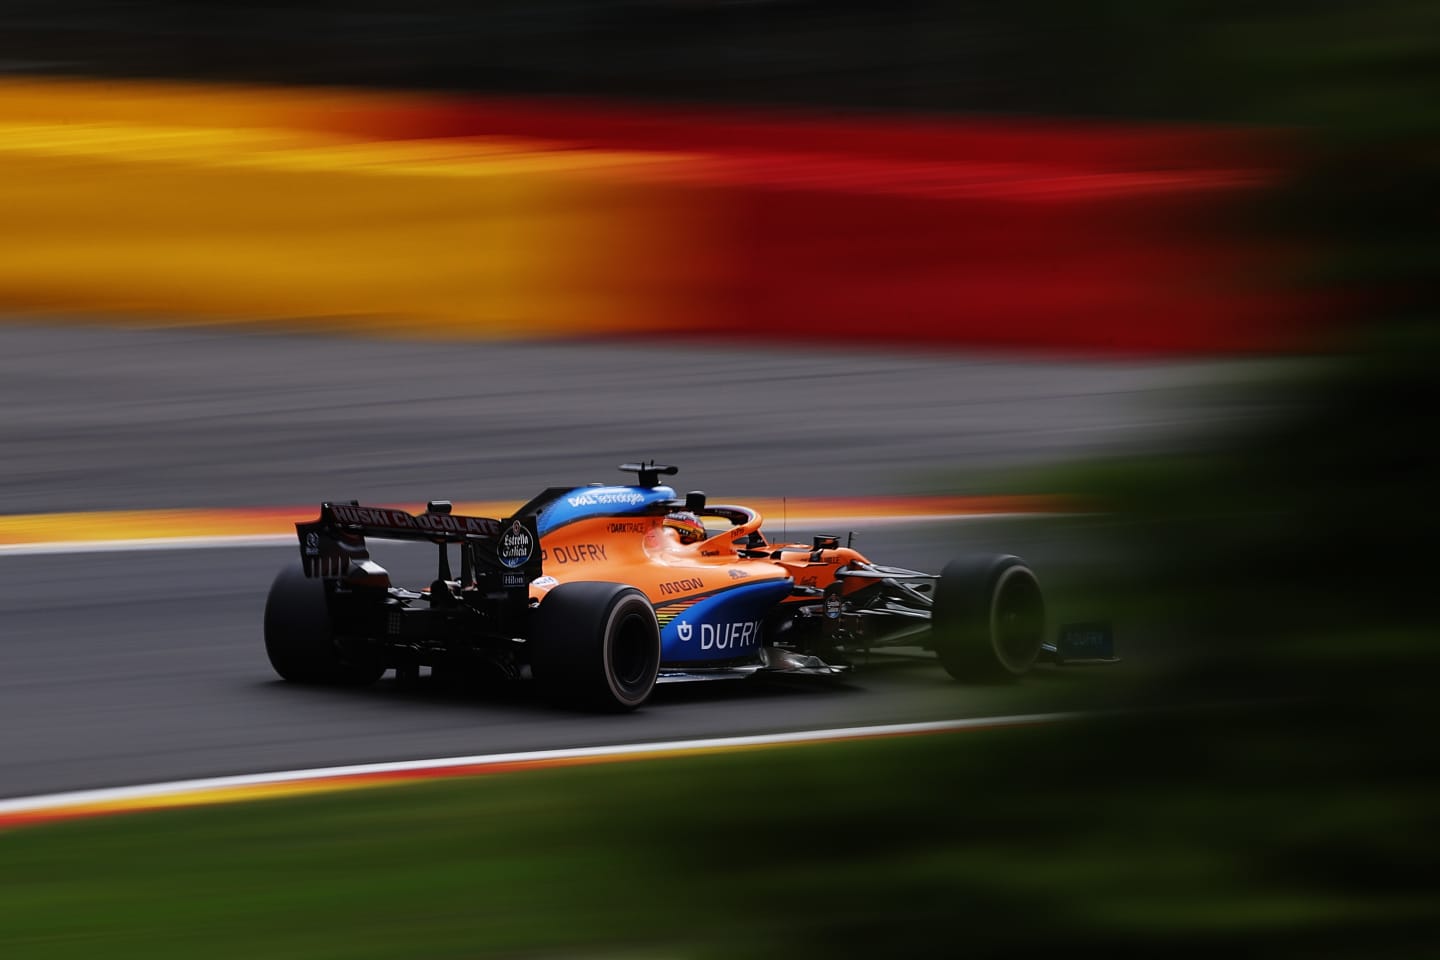 SPA, BELGIUM - AUGUST 28: Carlos Sainz of Spain driving the (55) McLaren F1 Team MCL35 Renault on track during practice for the F1 Grand Prix of Belgium at Circuit de Spa-Francorchamps on August 28, 2020 in Spa, Belgium. (Photo by Lars Baron/Getty Images)